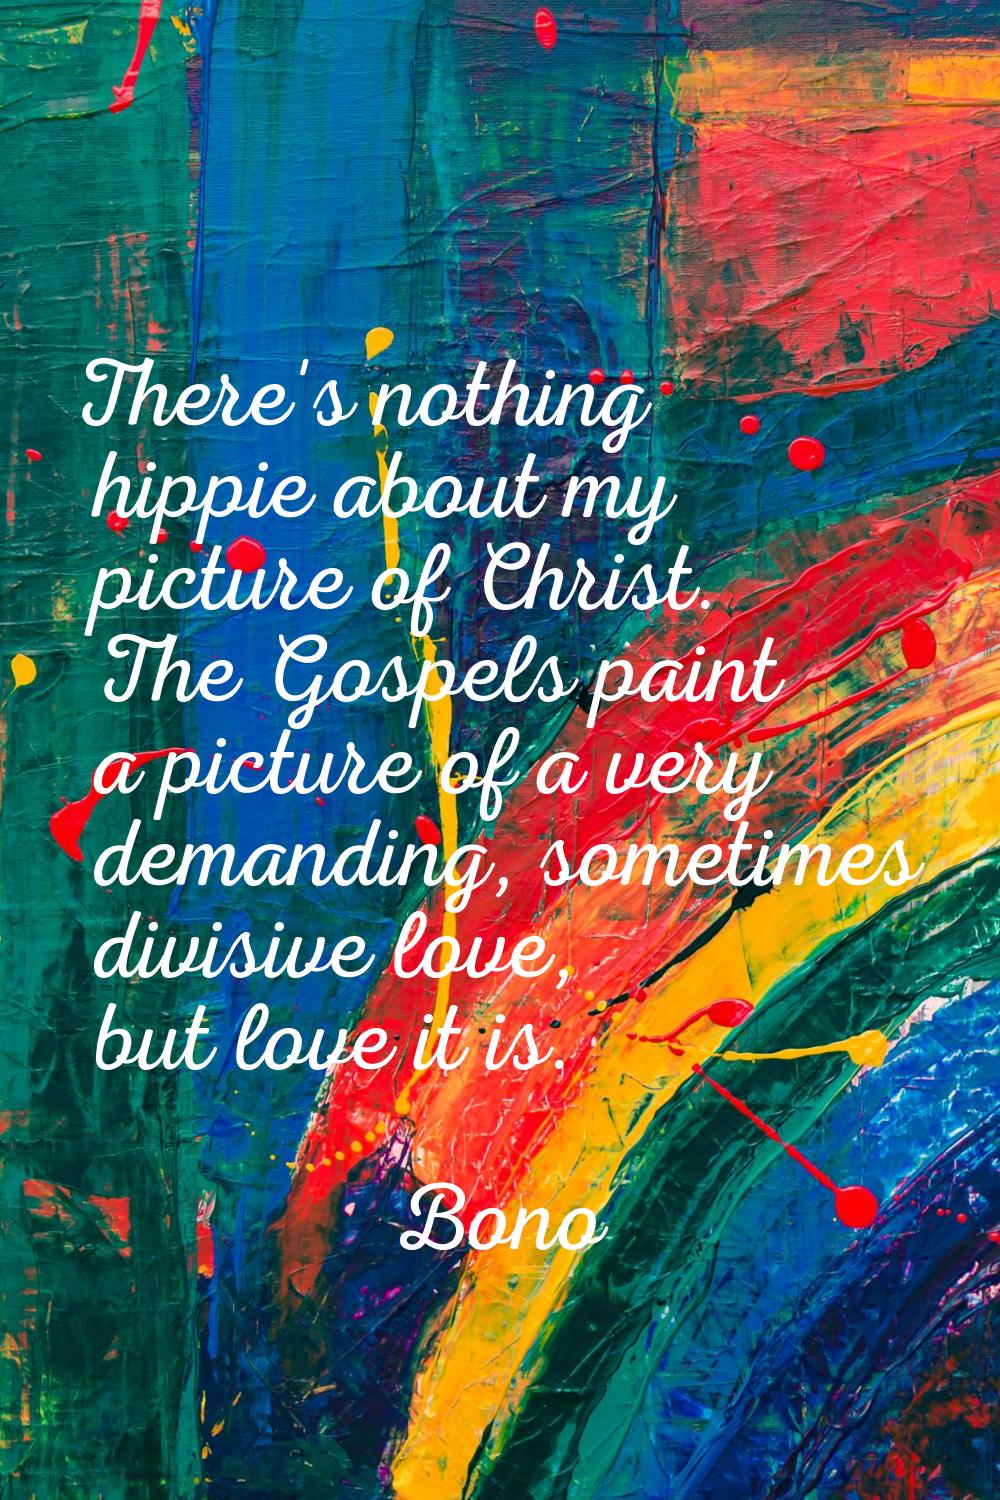 There's nothing hippie about my picture of Christ. The Gospels paint a picture of a very demanding,